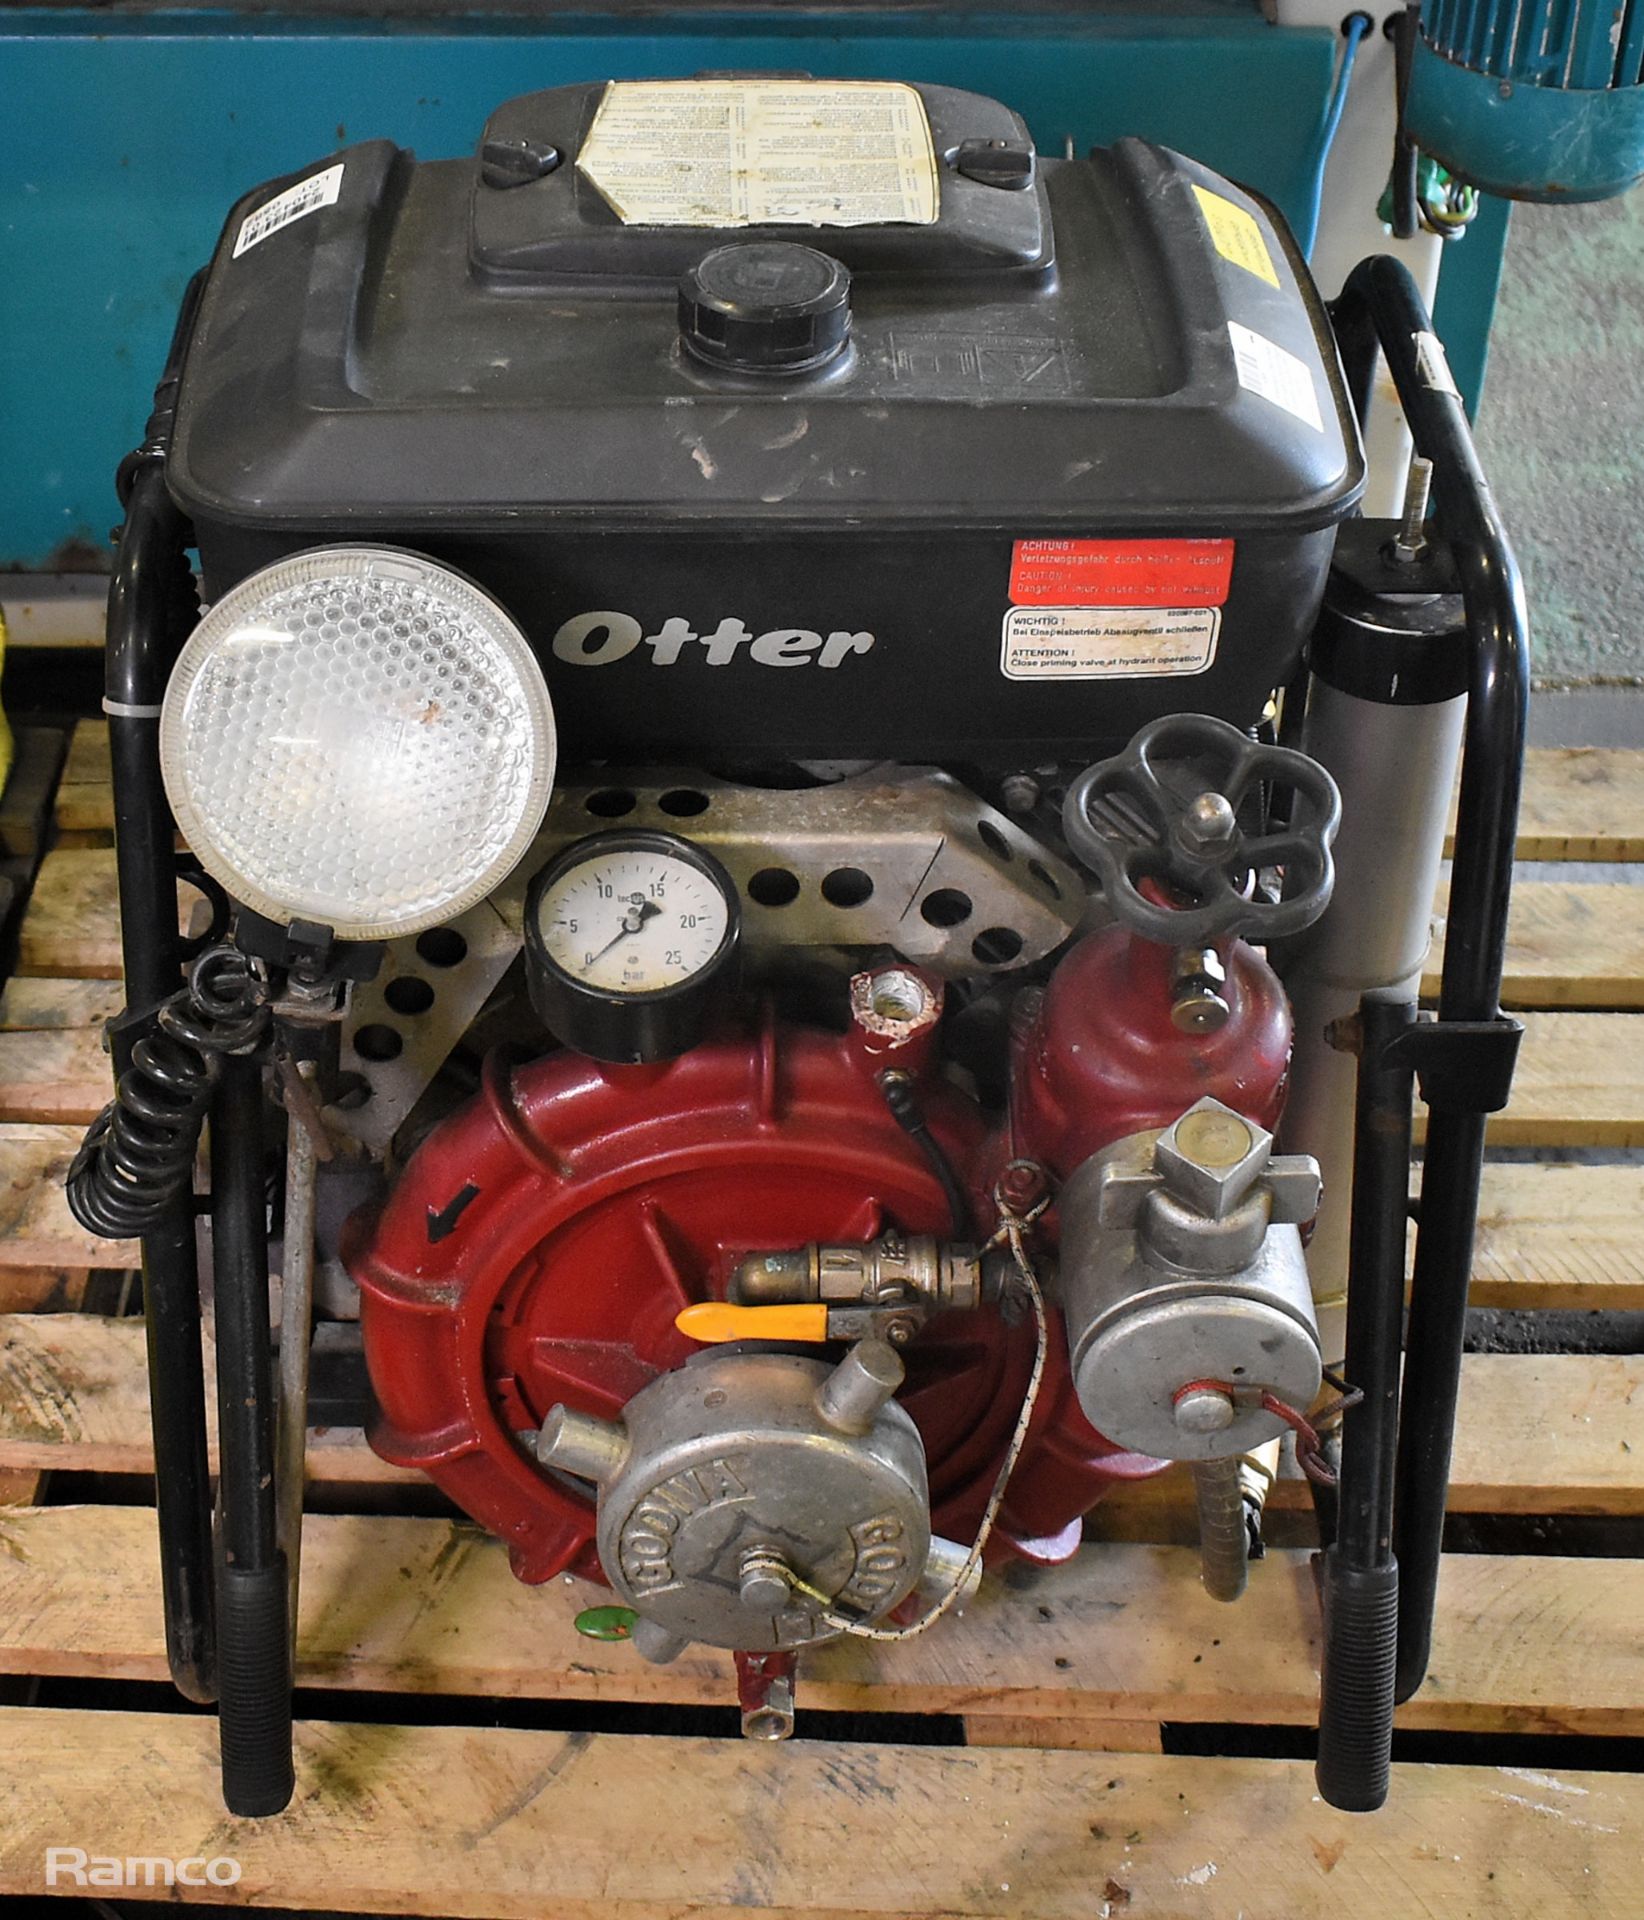 Rosenbauer Otter portable petrol water pump with Briggs & Stratton Vanguard 18HP engine - Image 7 of 12